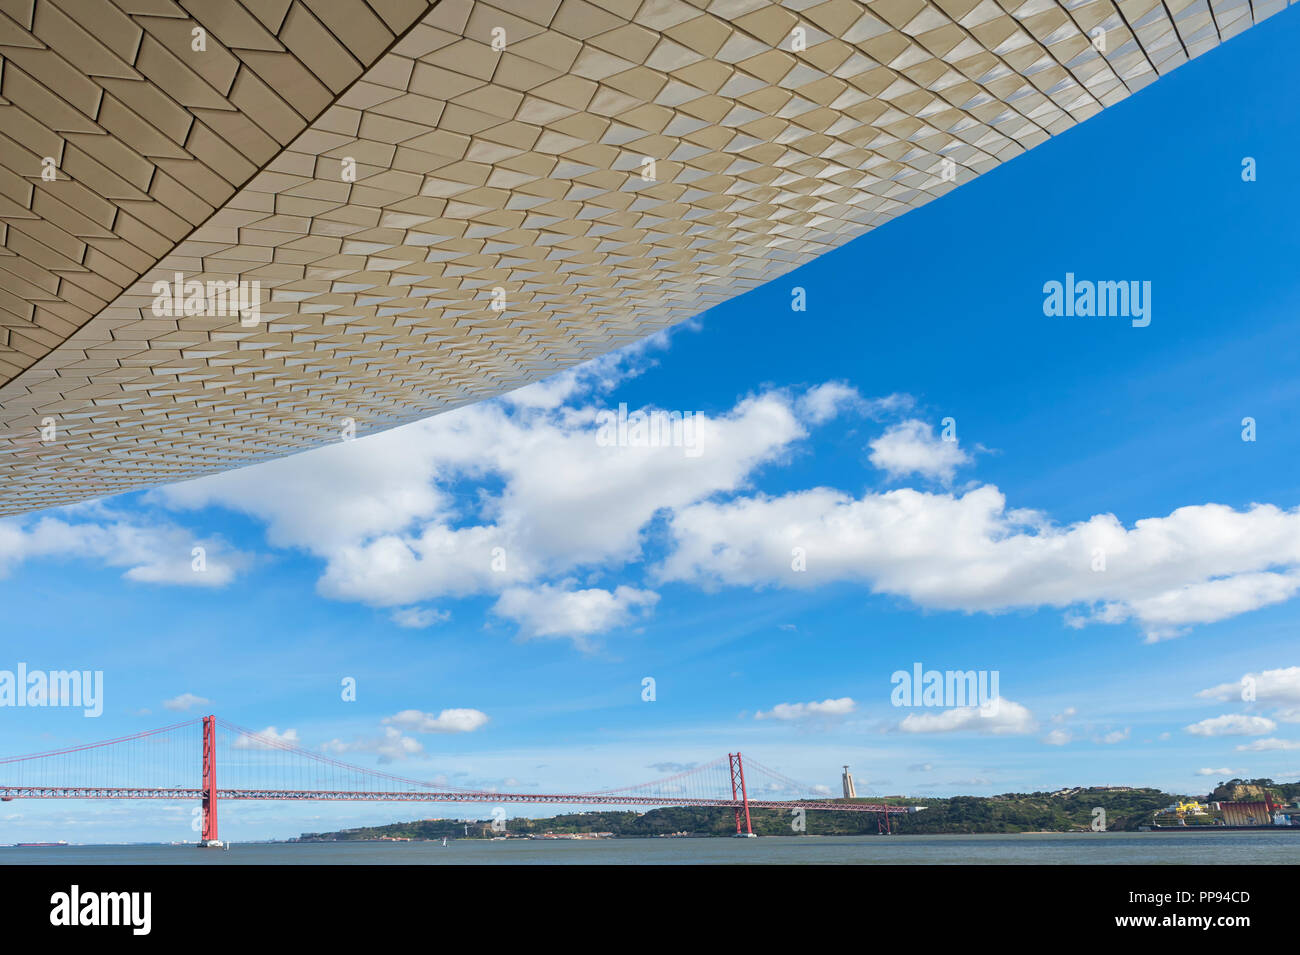 25 April Bridge, former Salazar bridge, over the Tagus river viewed from the MAAT – Museum of Art, Architecture and Technology, Lisbon, Portugal Stock Photo